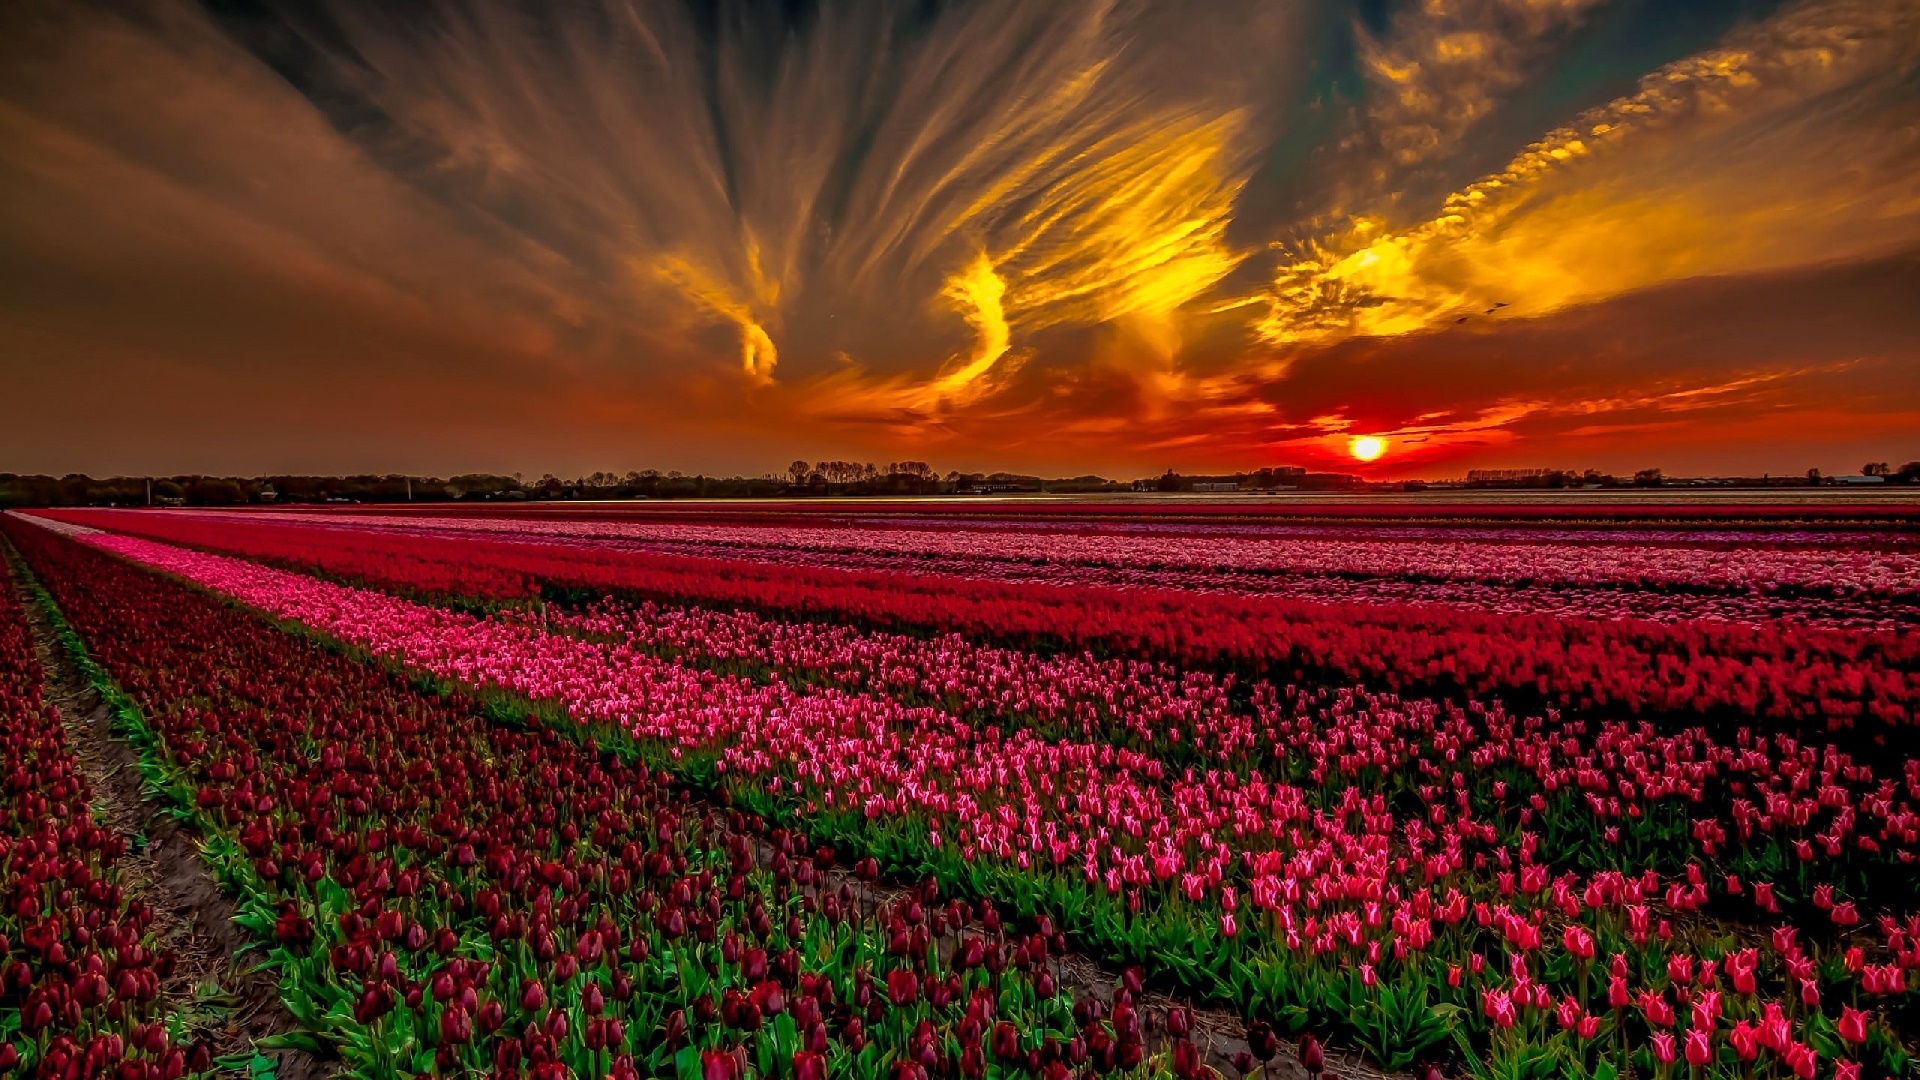 Clouds And Sunset Over Tulip Field Image Abyss